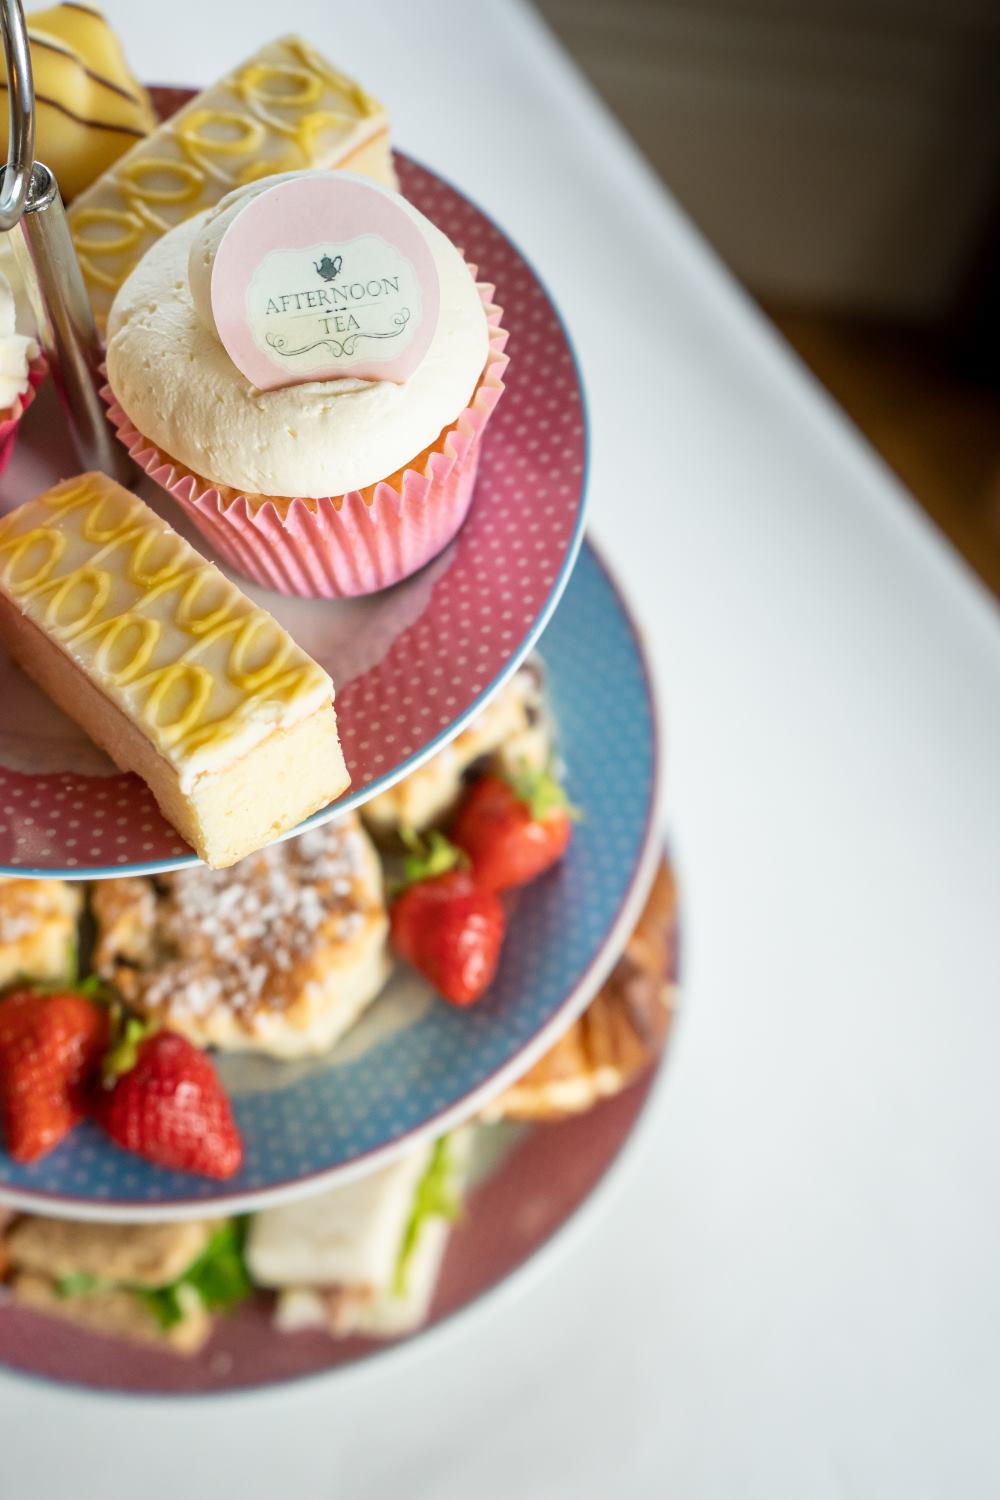 Afternoon tea with branded cupcakes using printed edible toppers